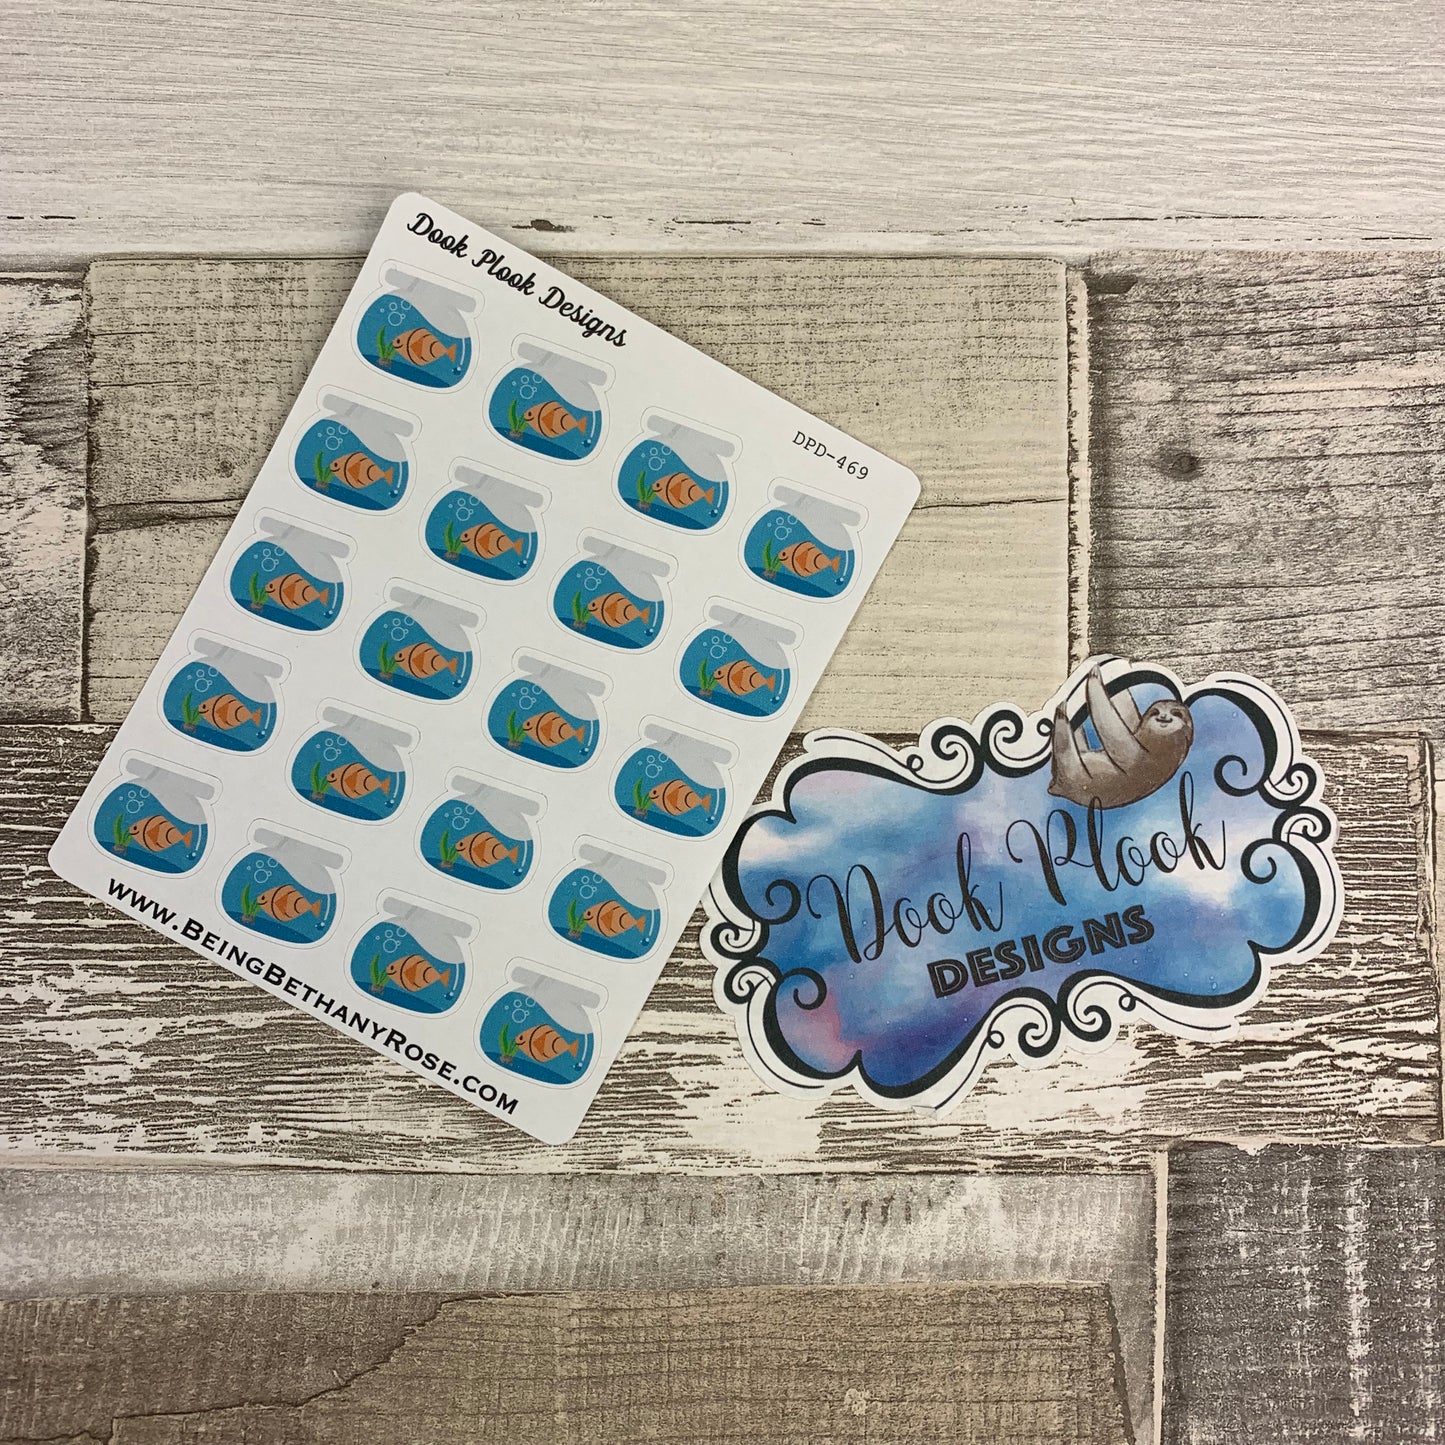 Fish bowl stickers (DPD469)